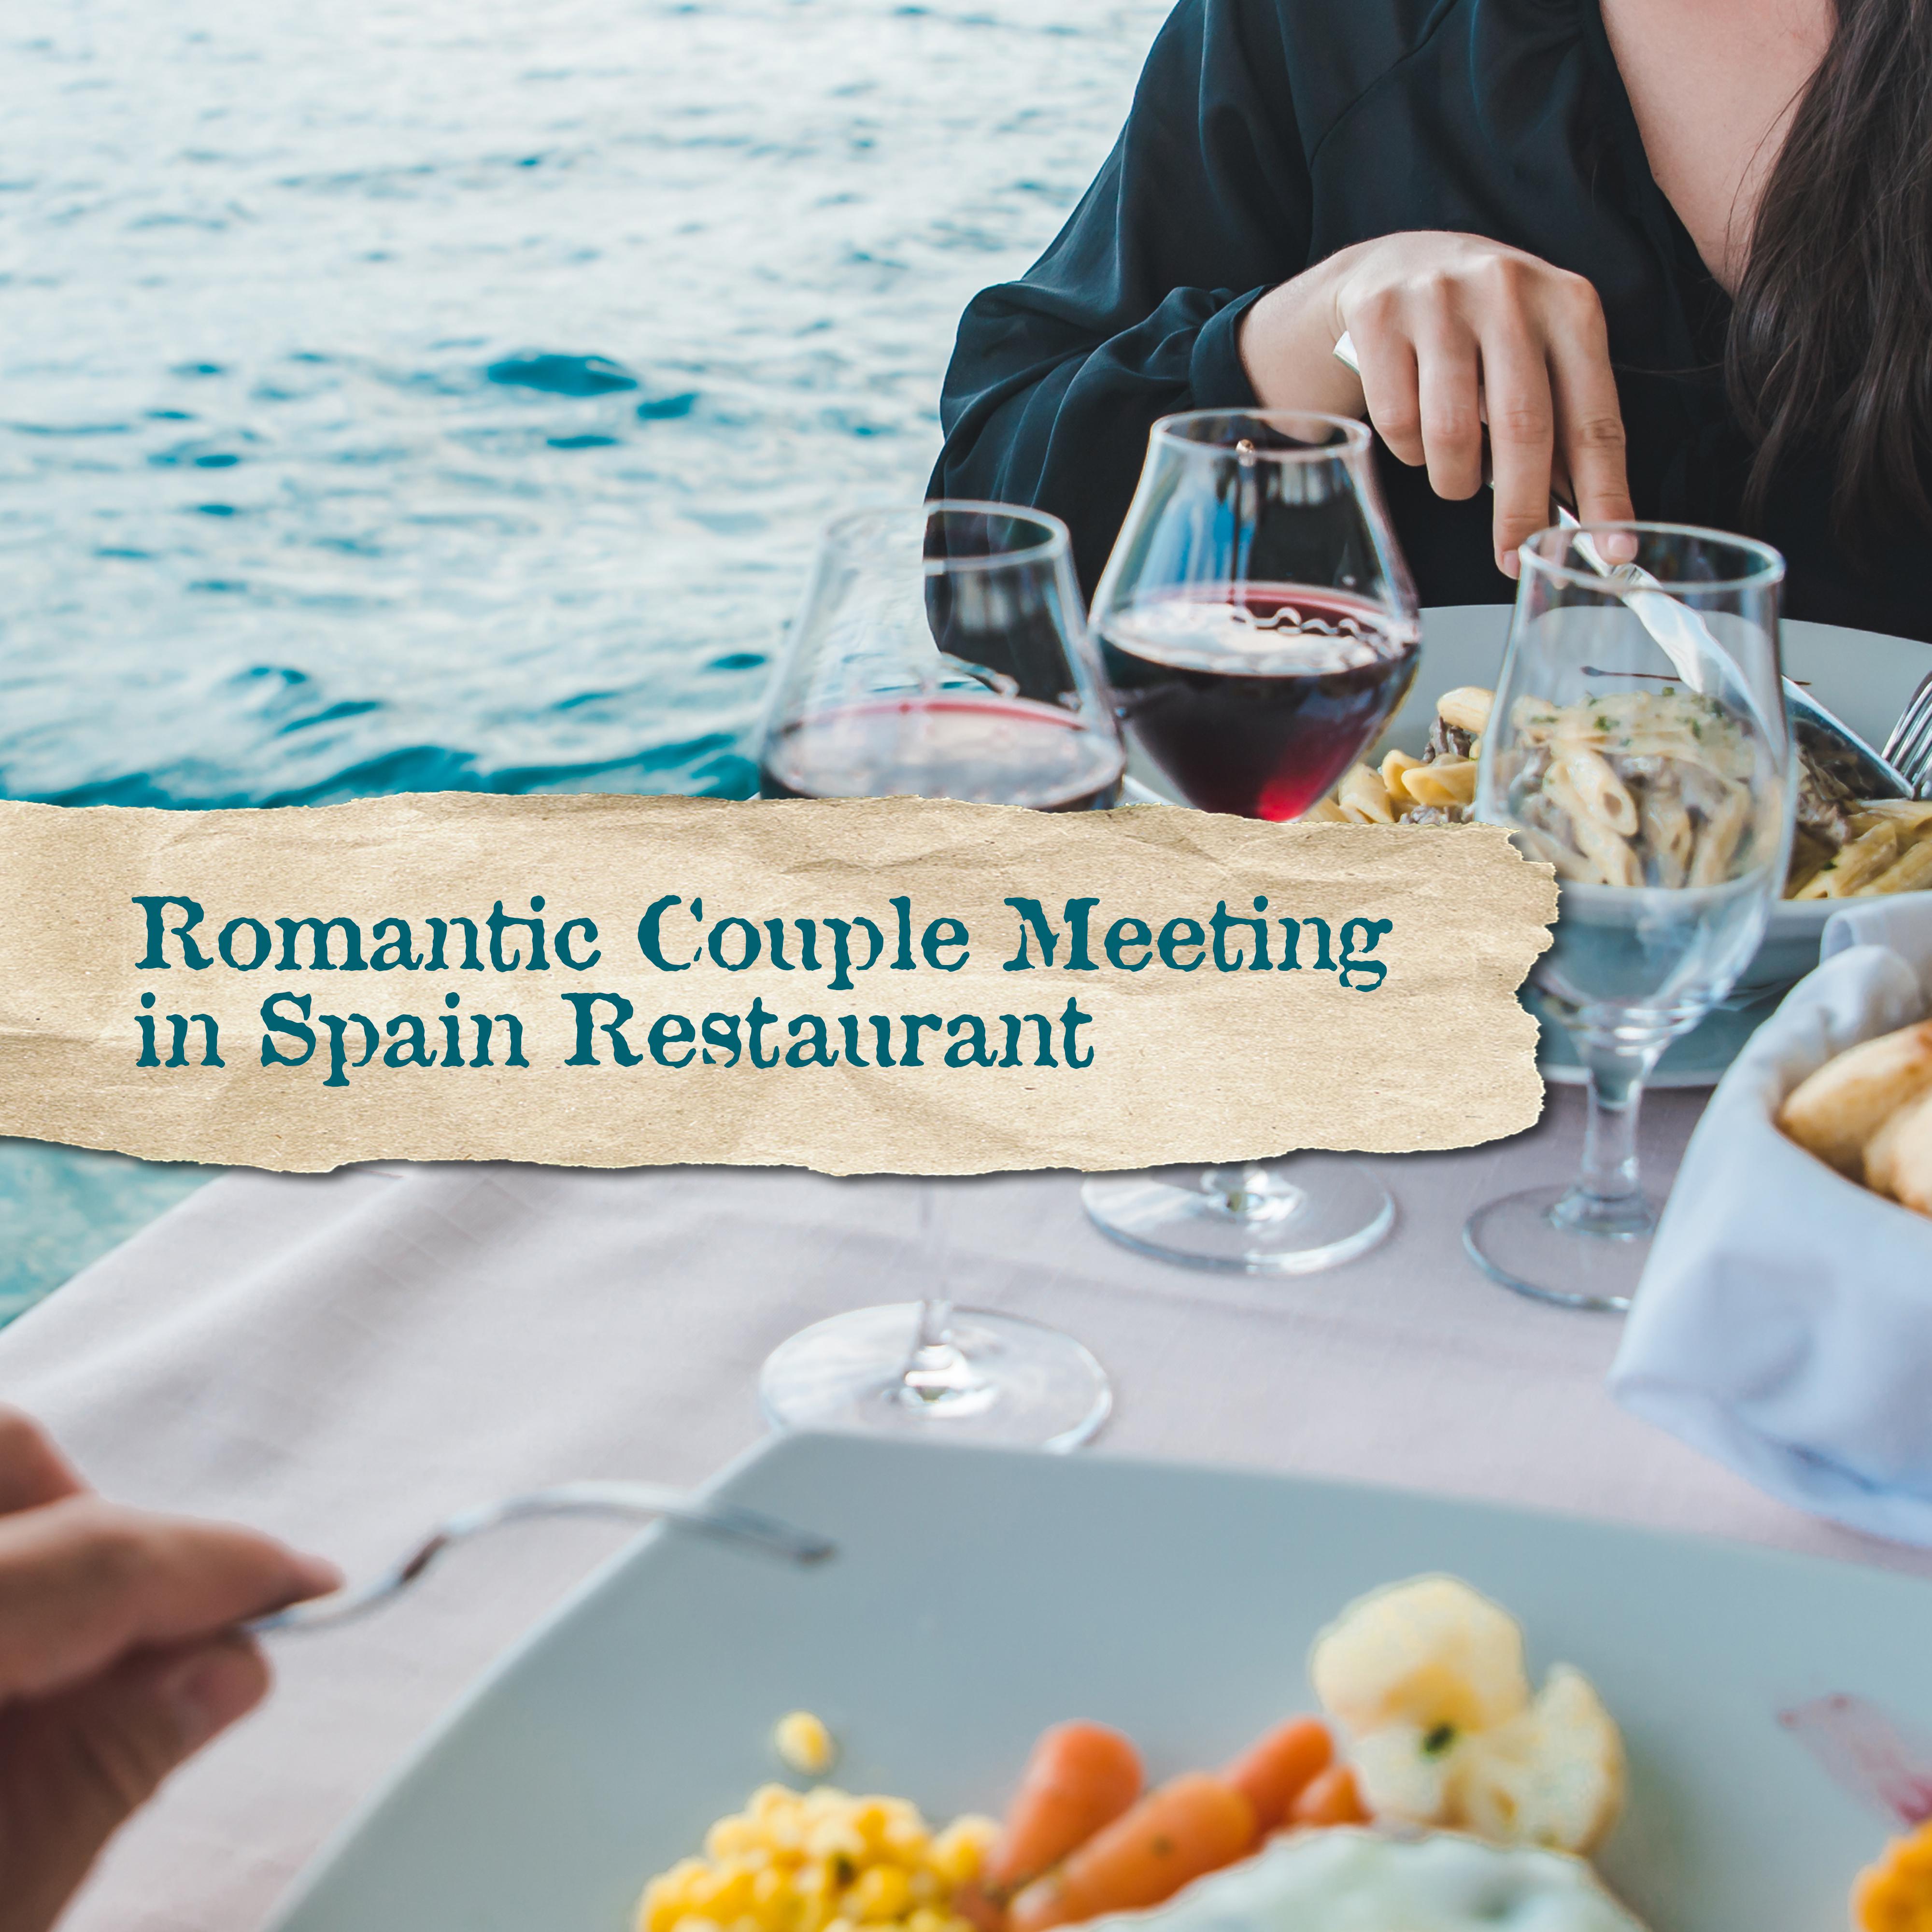 Romantic Couple Meeting in Spain Restaurant: Instrumental Smooth Jazz Background Music for Lovers Dinner